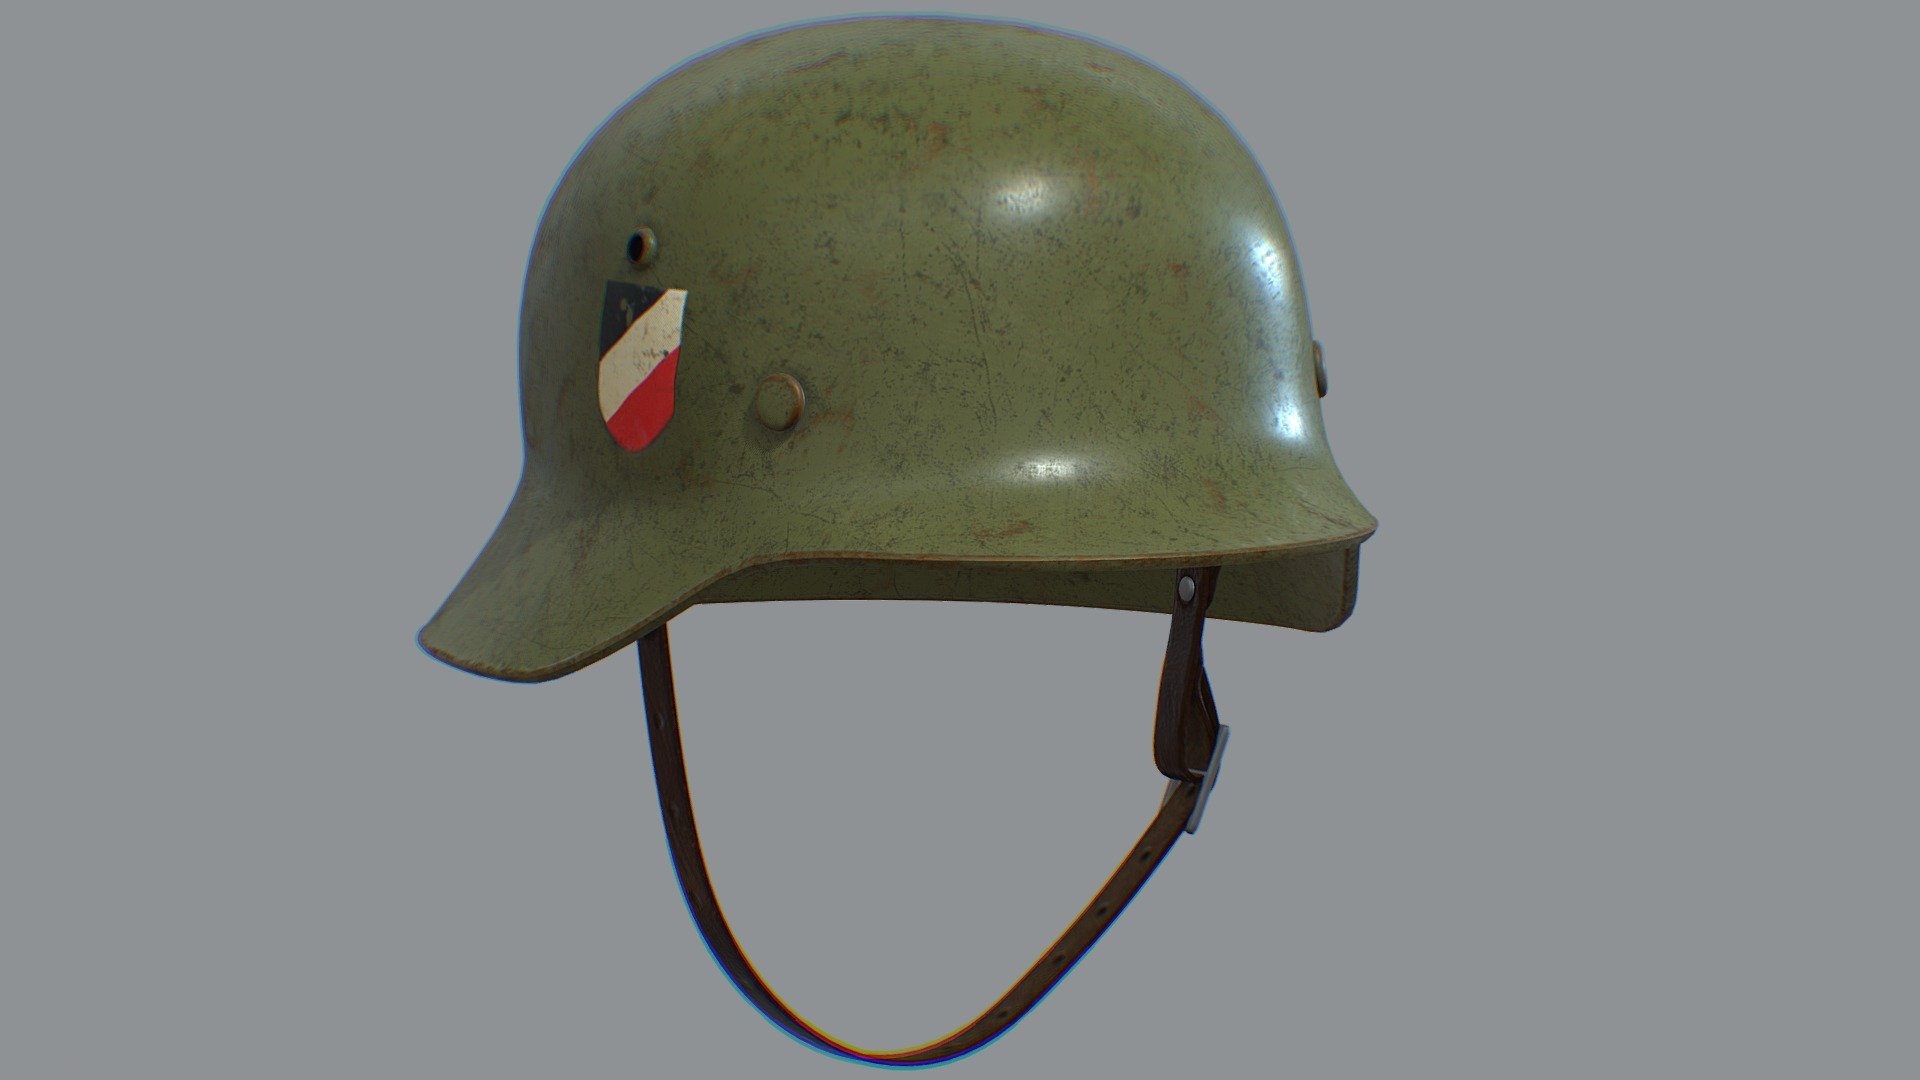 Nazi Helmet is a high quality, photo real model that will enhance detail and realism to any of your rendering projects. The model has a fully textured, detailed design that allows for close-up renders, and was originally modeled in cinema 4d and rendered with advance render and marmoset.
|| USAGE ||
This model is suitable for use in (broadcast, high-res film closeups, advertising, design visualization, forensic presentation, etc).
|| SPECS ||
The model contains 1 object .
The model contains 4454 polygons without subdivision.
|| TEXTURES ||
PBR Textures :Base color / metalness / Normal / Roughness / OA .
Dim :
2048 x 2048
|| FORMAT ||
CINEMA4D R17 .
3ds Max 2016 .
FBX Low Poly.
|| GENERAL ||
Model is built to real-world scale .
Units used: Centimeters.
Please rate it if you like it.Thank you 3d model